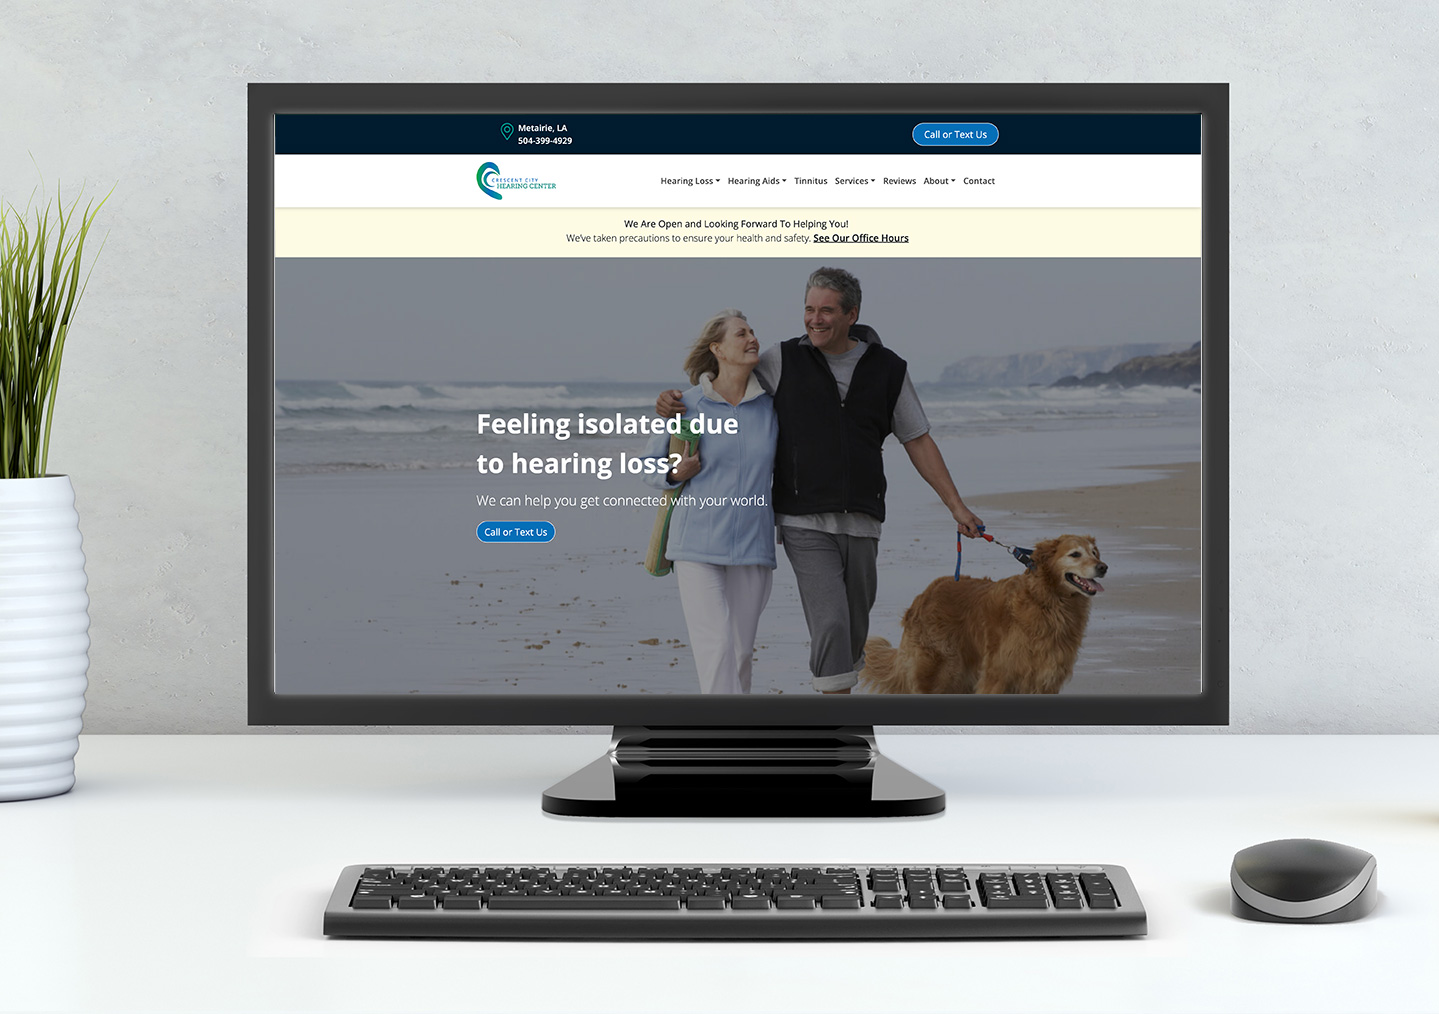 Top Website Design example for Audiologists